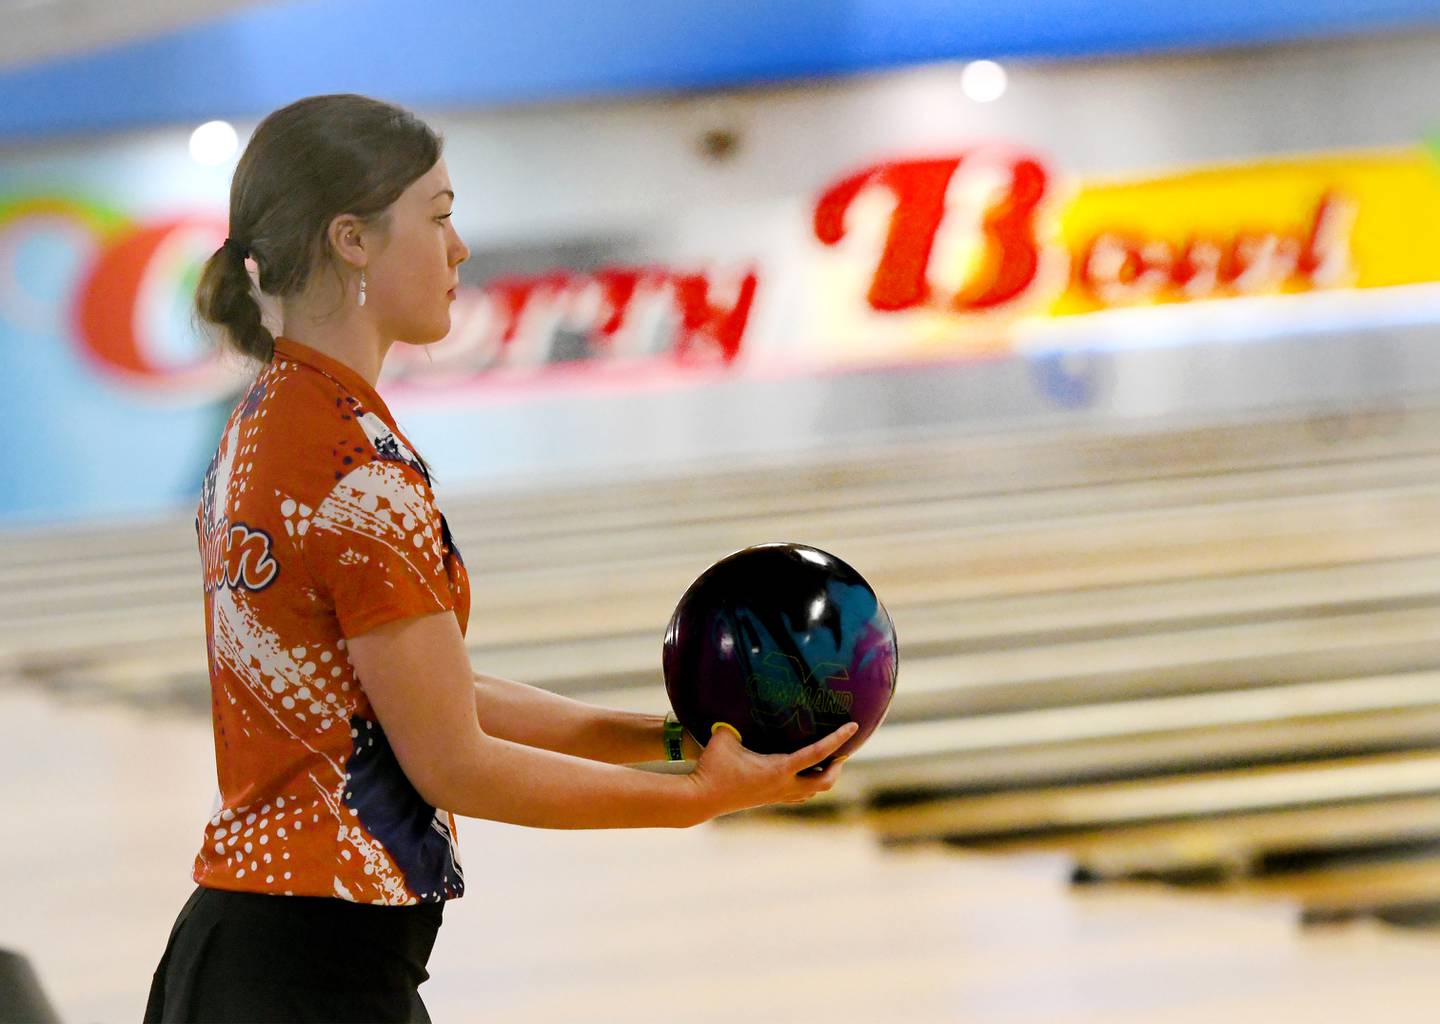 Oregon's Av Wight gets ready to bowl during the finals of the girls state tournament held at Cherry Bowl in Cherry Valley on Saturday.